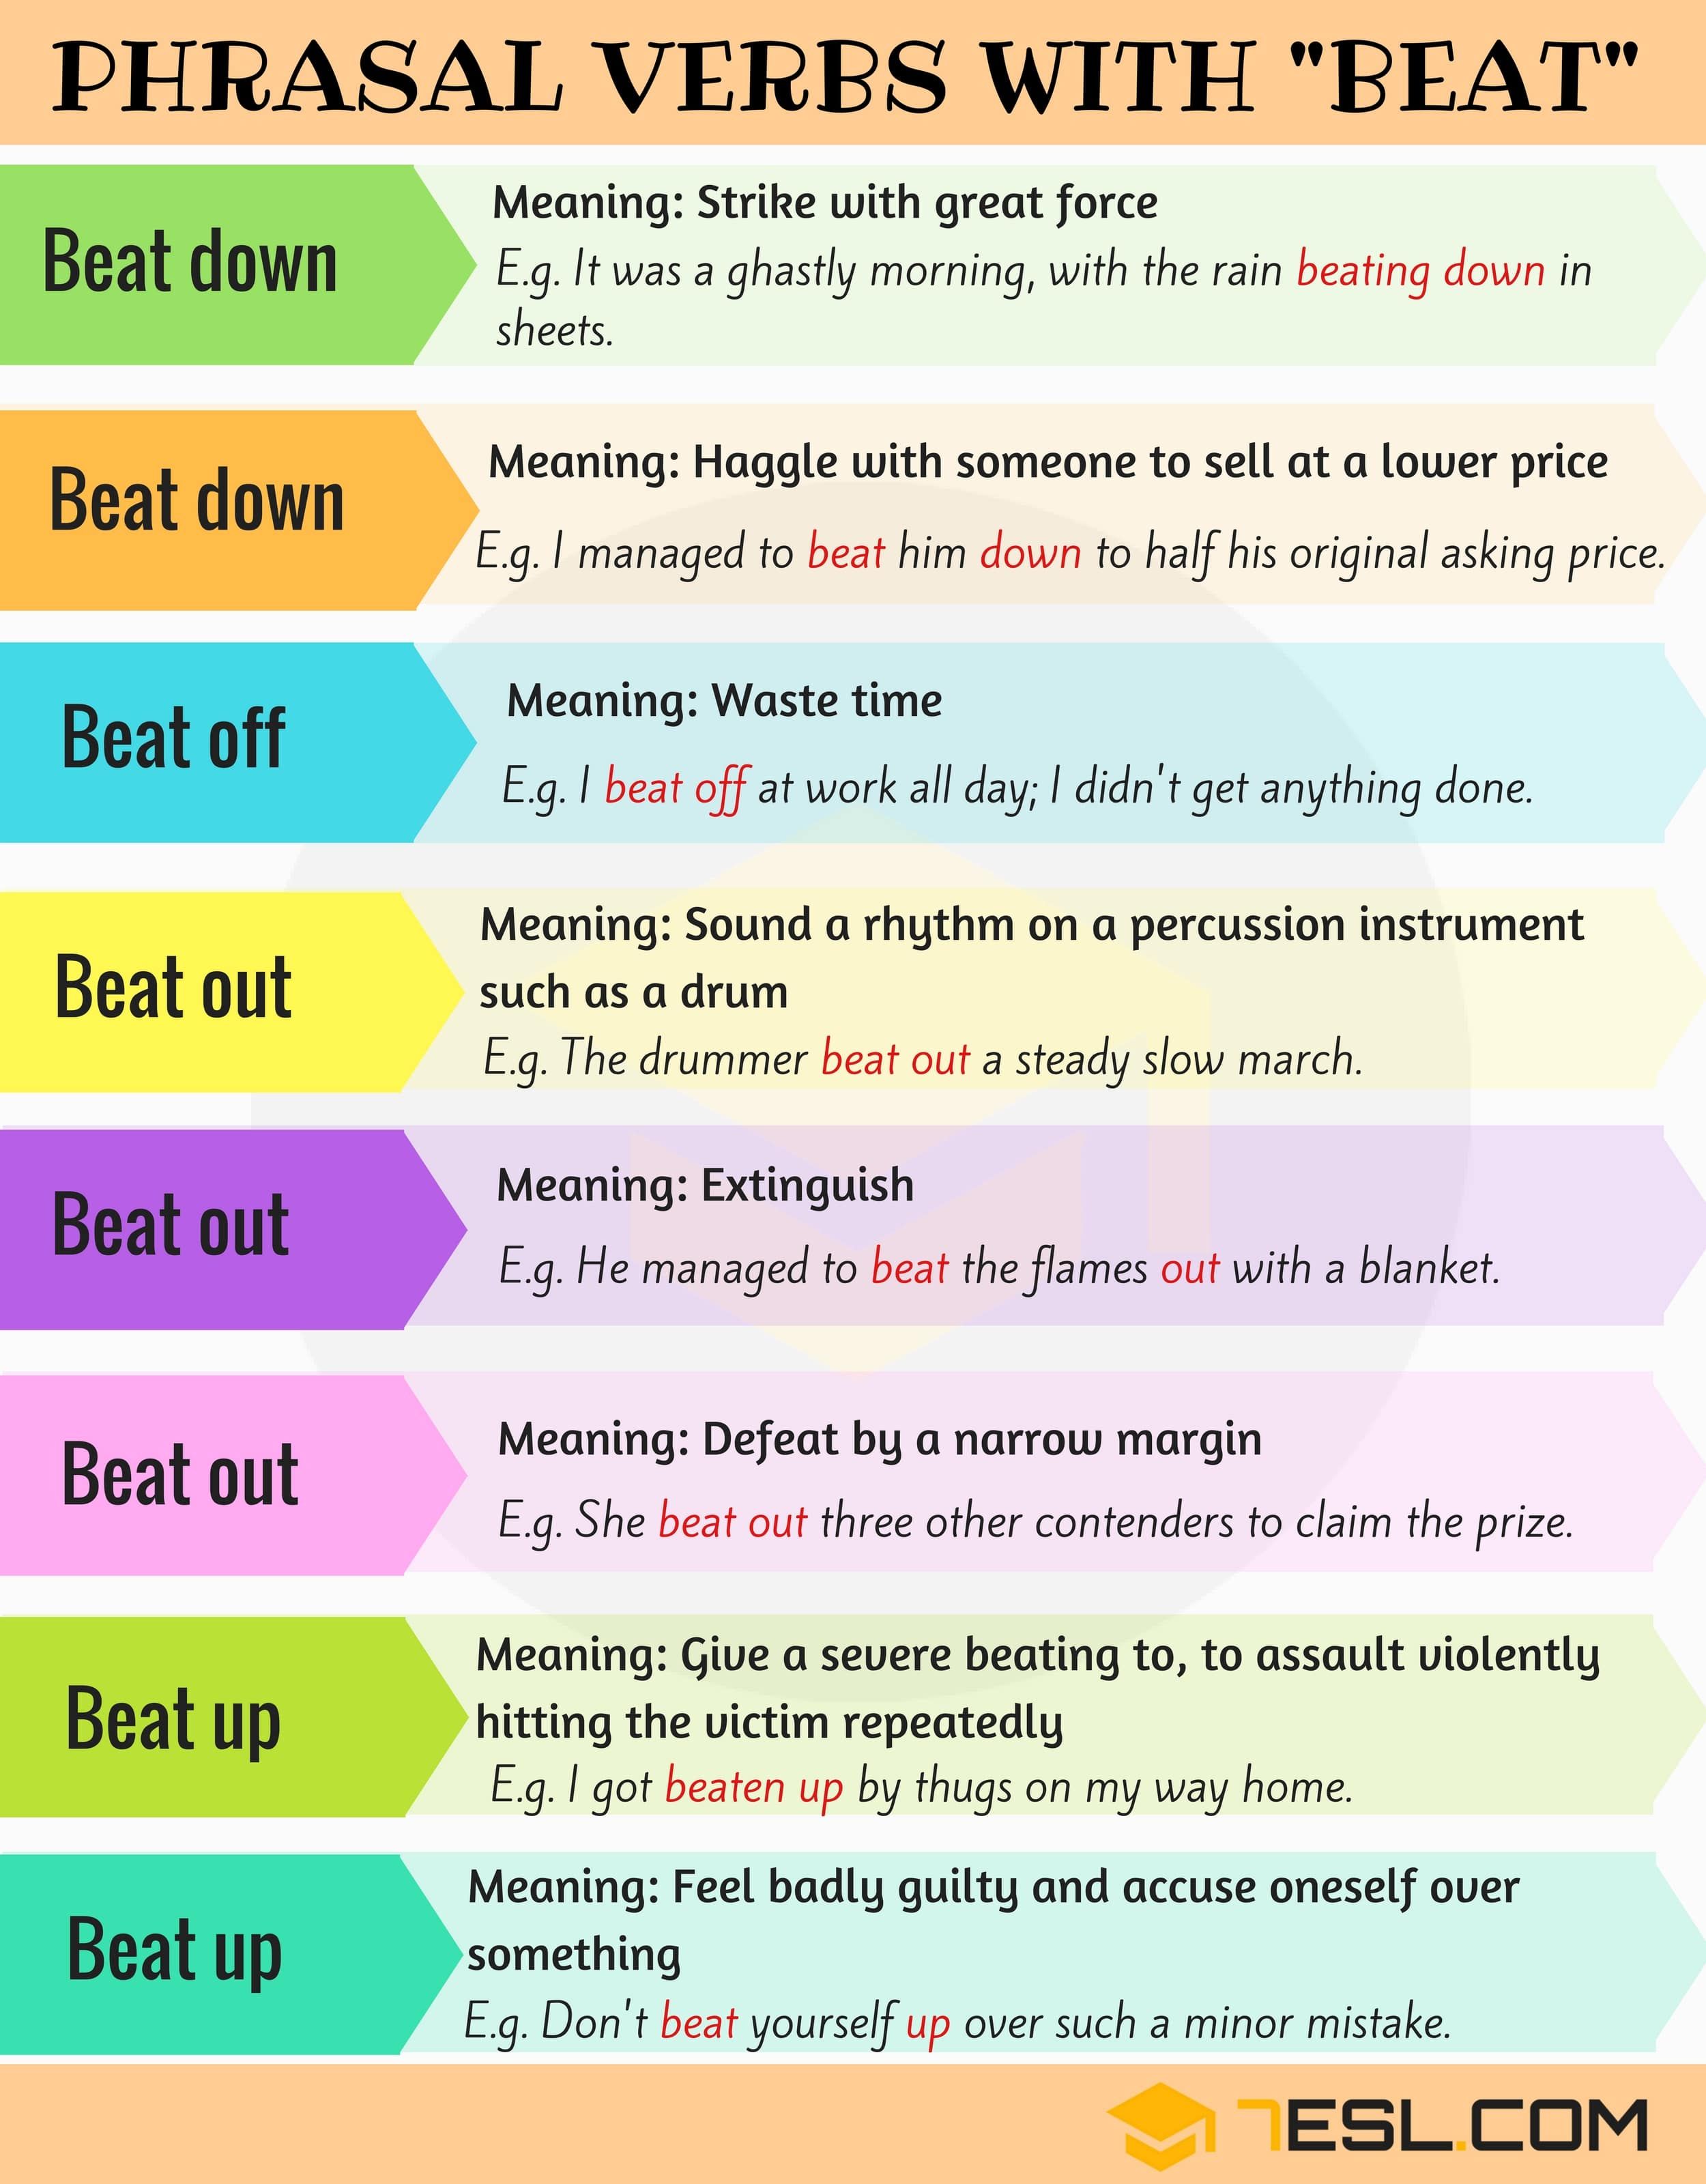 health-phrasal-verbs-with-meaning-and-examples-7-e-s-l